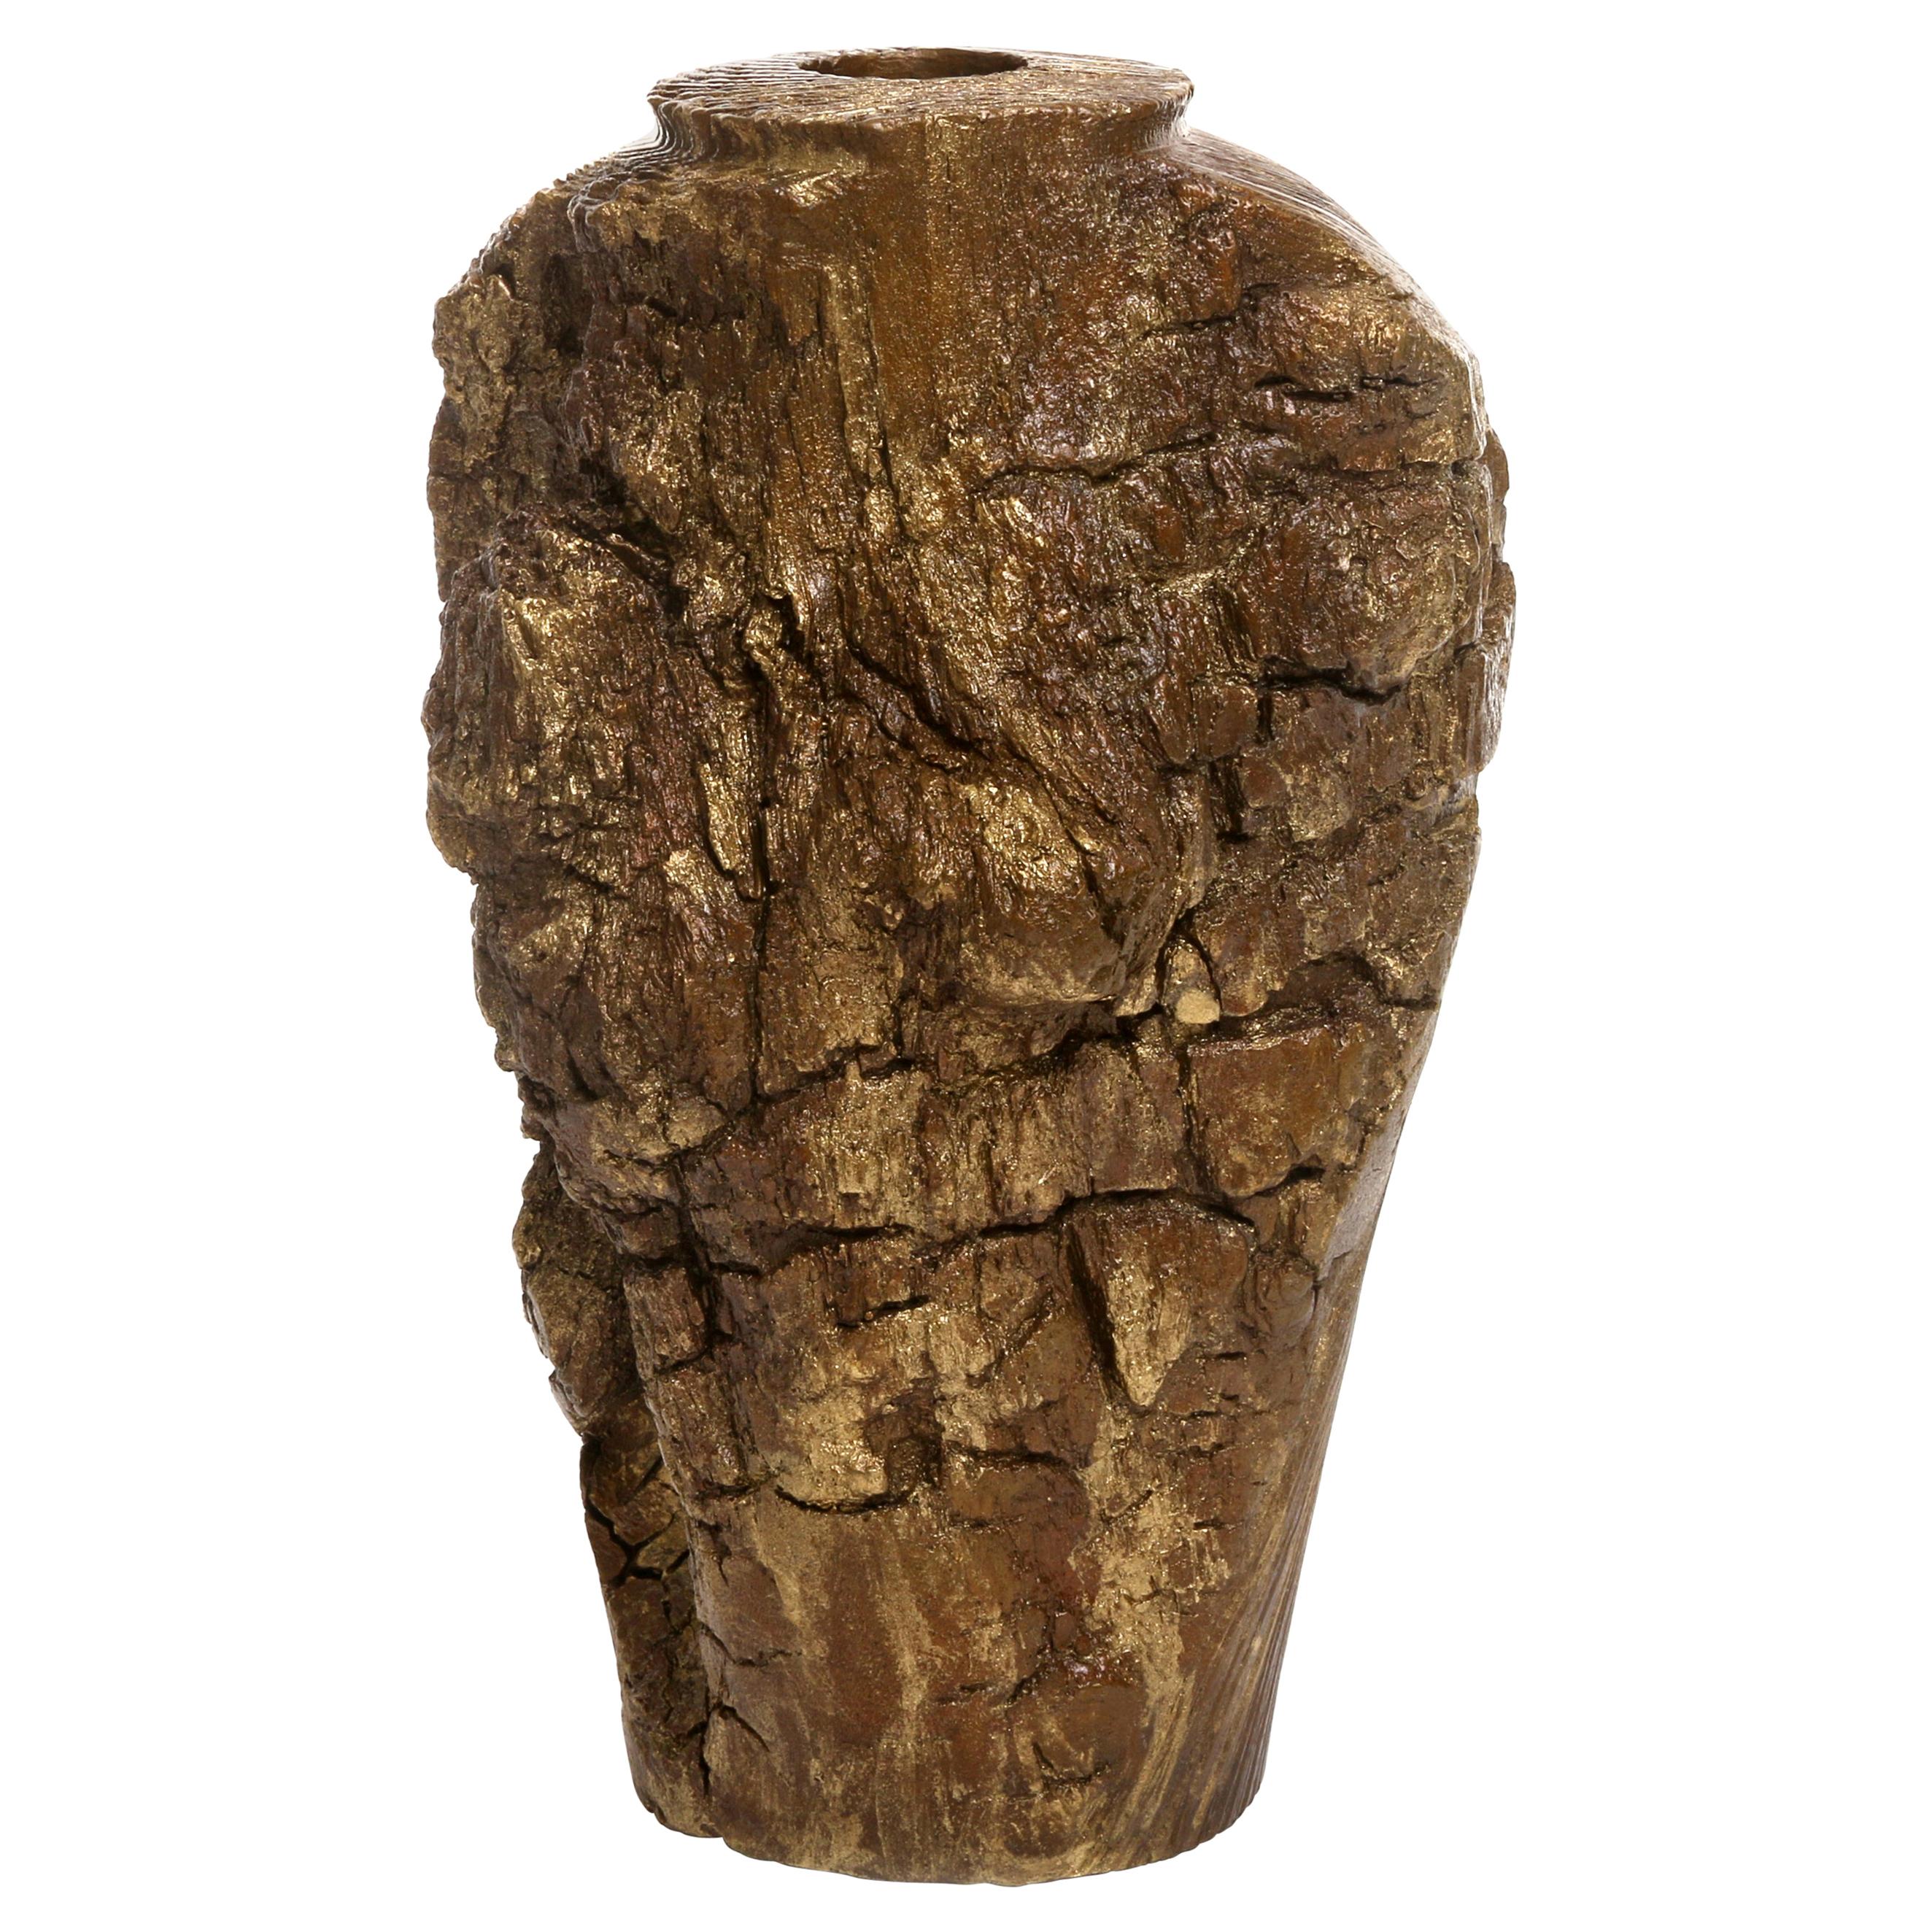 Solid Bronze "Cliff" Vase or Sculpture with Wood Texture in Gold Patina, Large For Sale